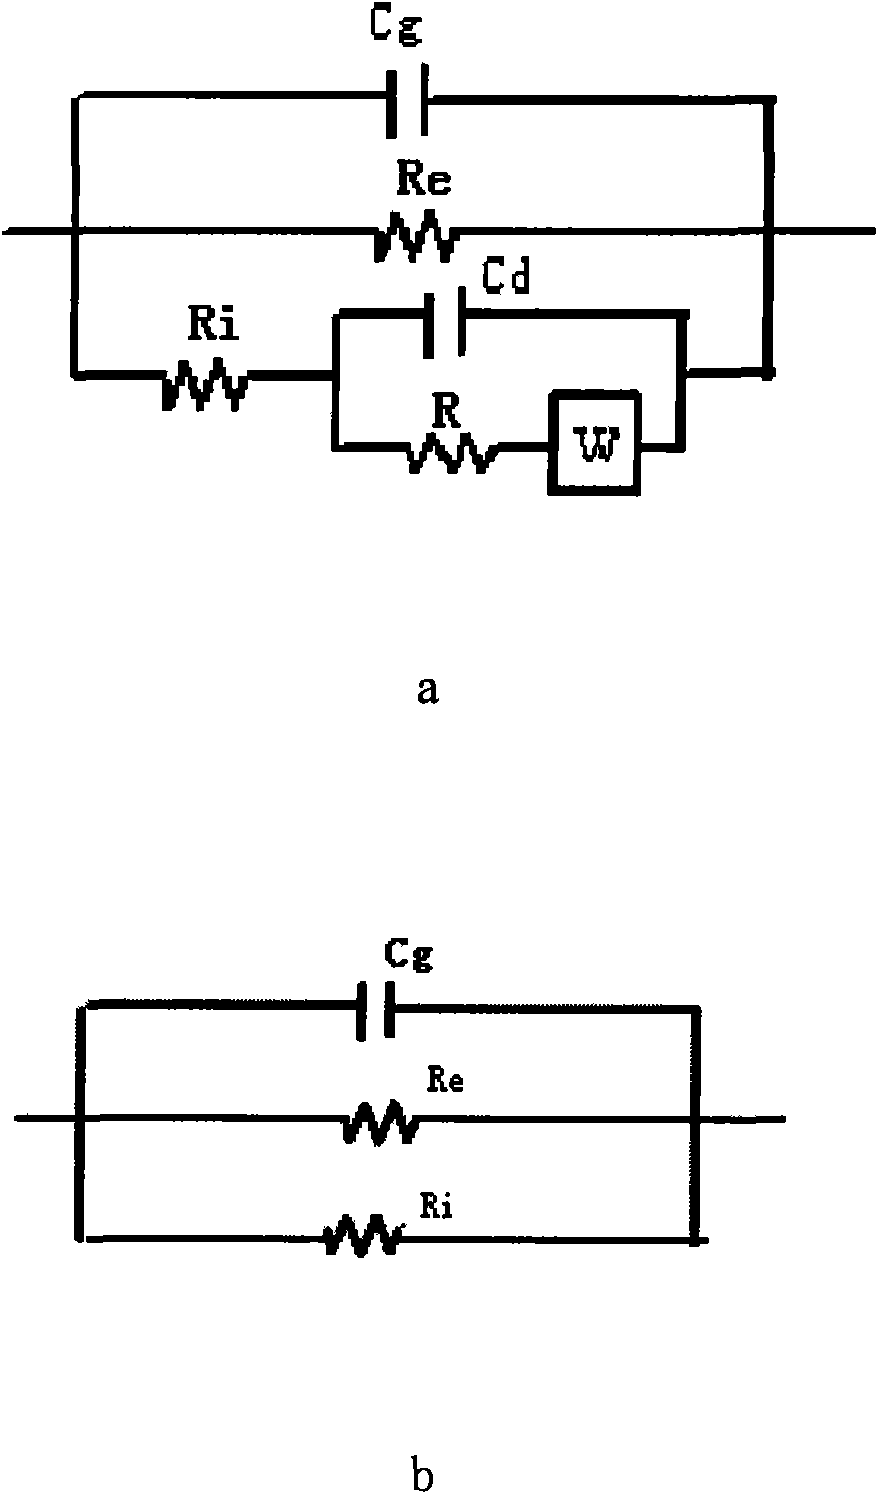 Method for testing electrical conductivity of powdered material